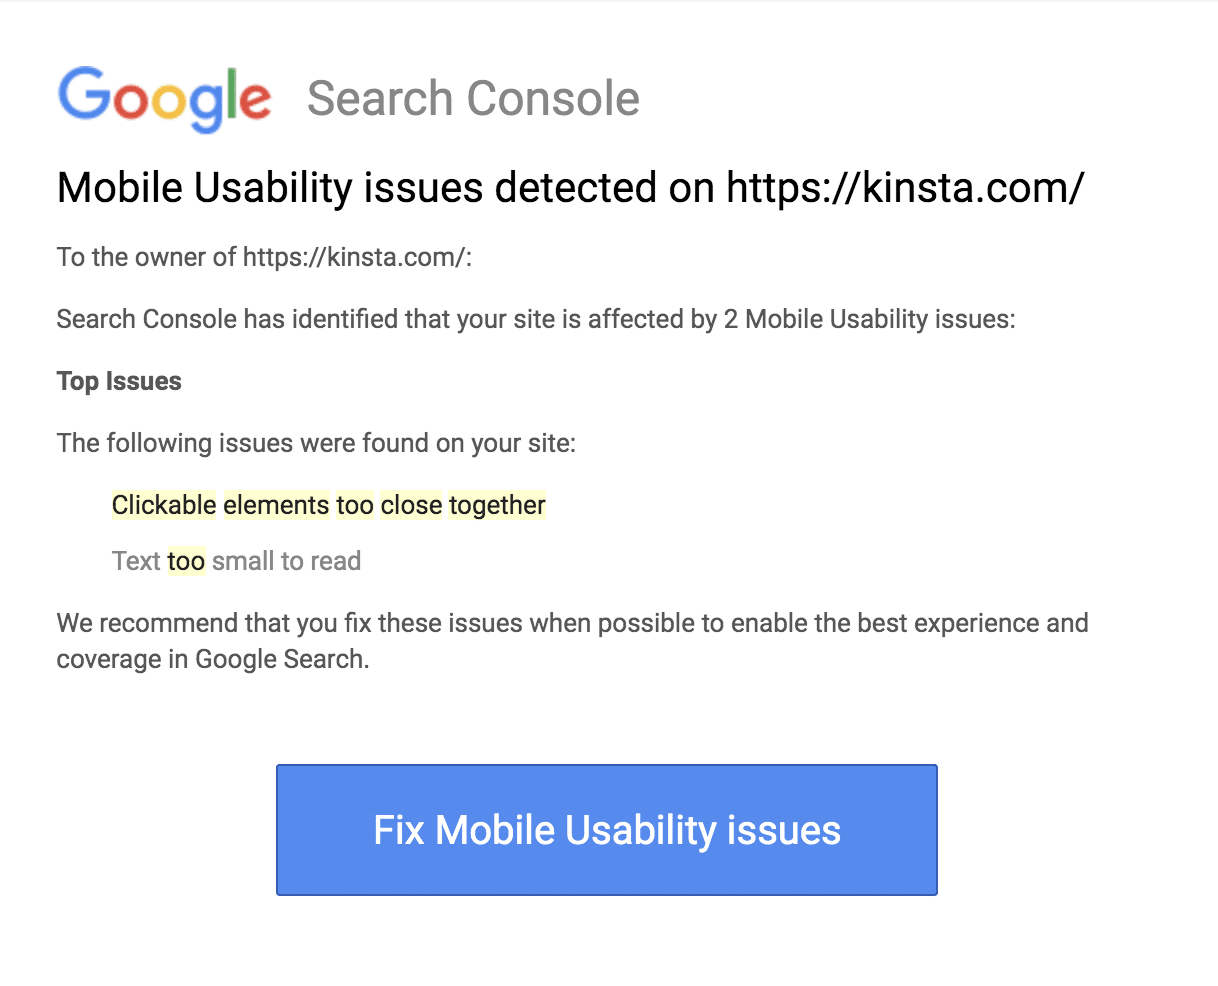 A mobile usability issues report from Google Search Console.